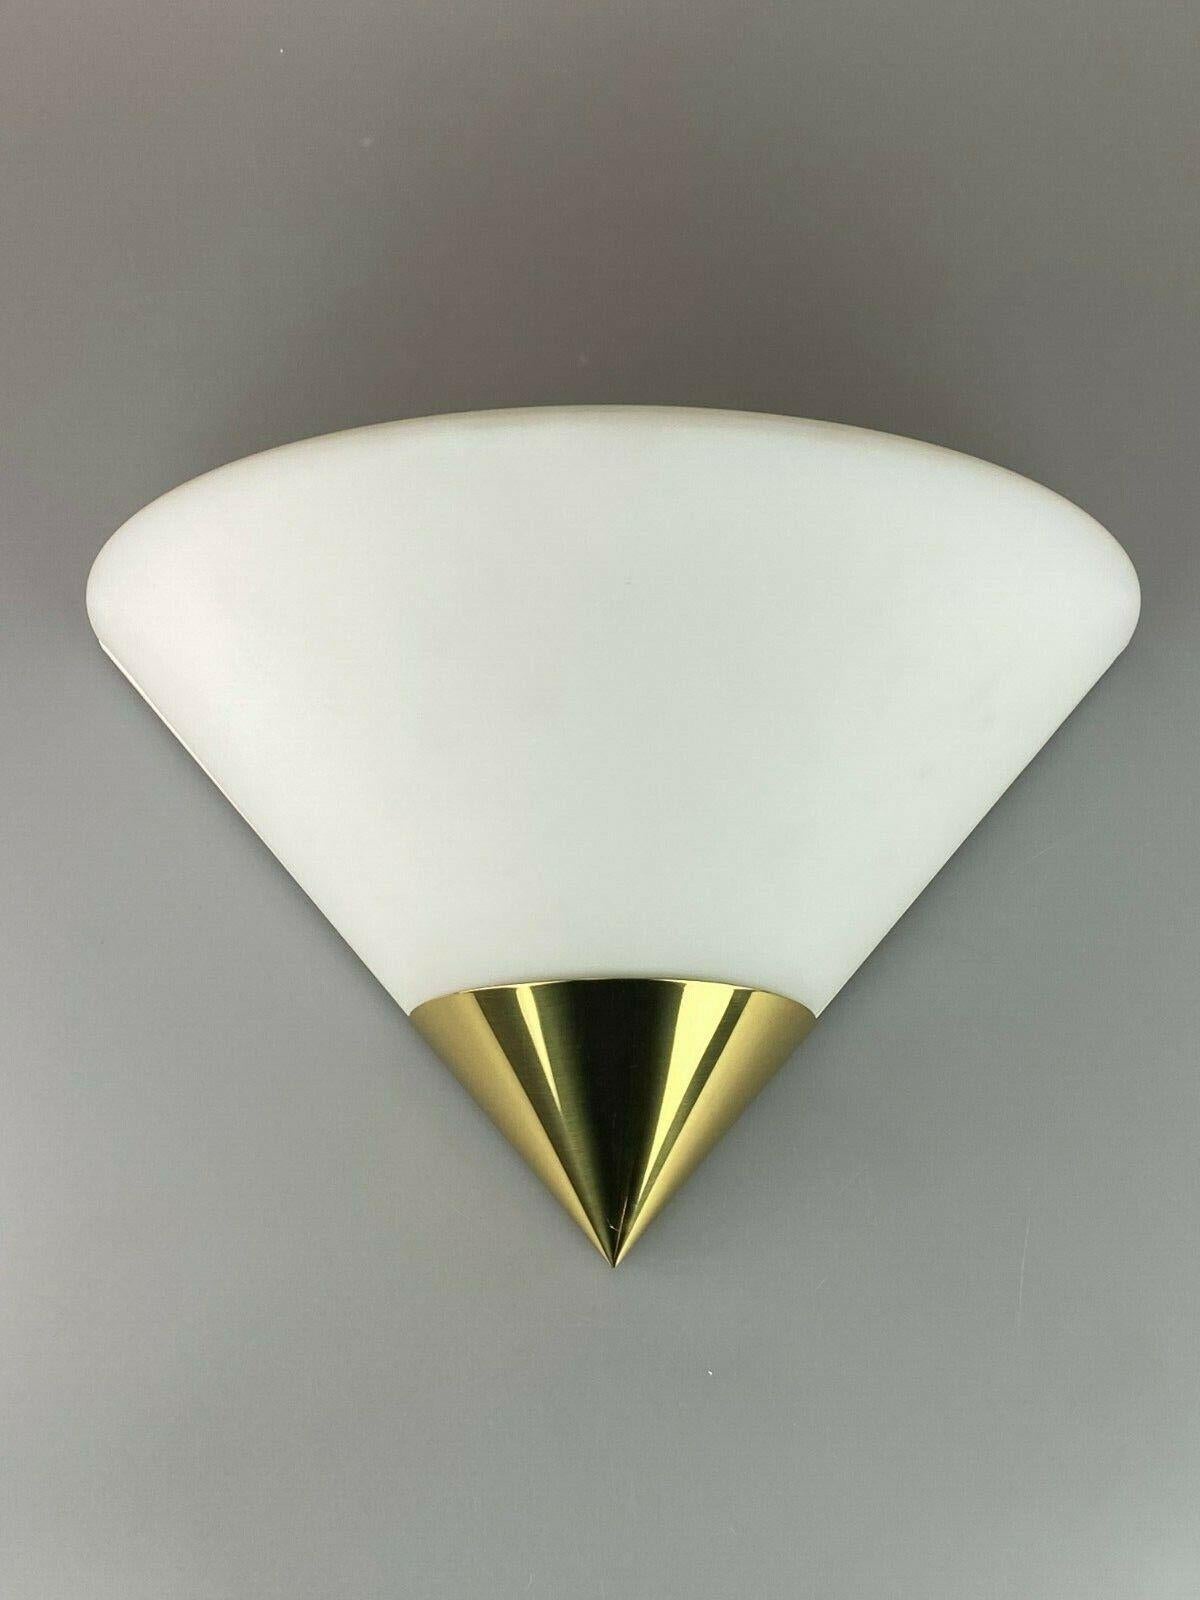 German 60s 70s Lamp Light Wall Lamp Limburg Plafoniere Space Age Design For Sale